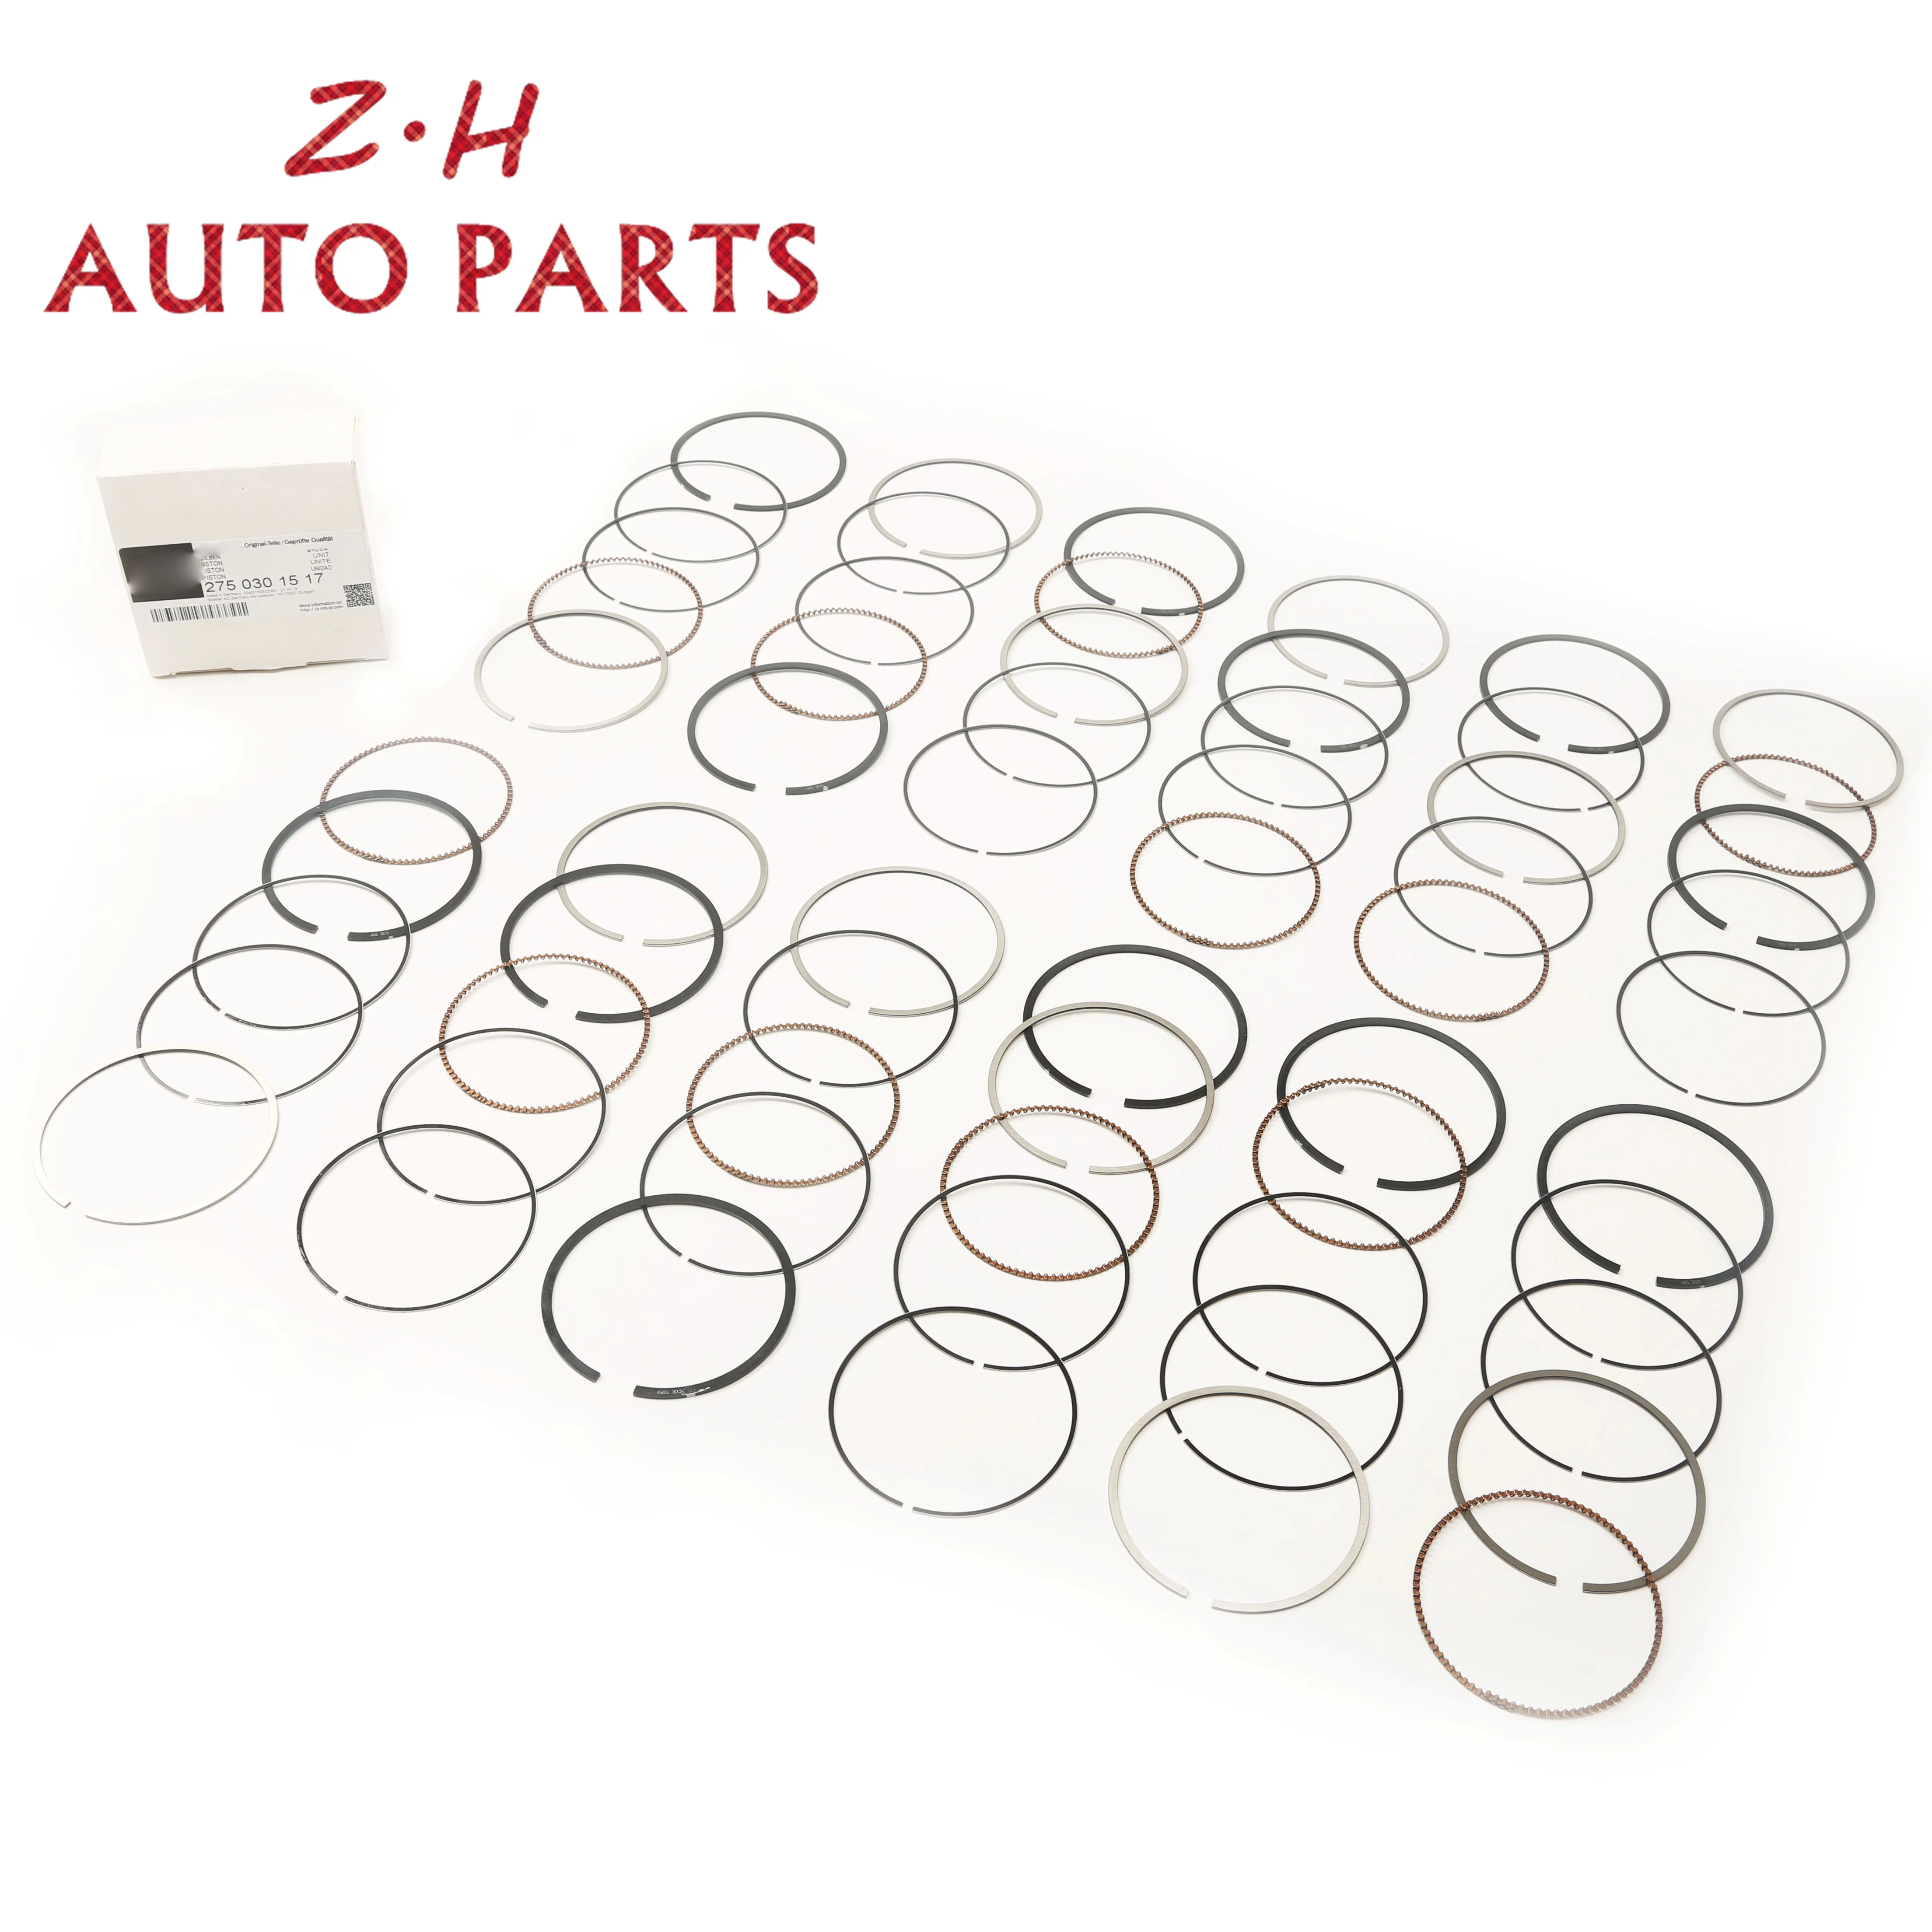 

001 PI 91201 000 New Cyl. Bore 82MM 12x Piston Rings Set For Benz M275 C216 W220 W221 CL 600 S 600 L Grand Edition 2750301517